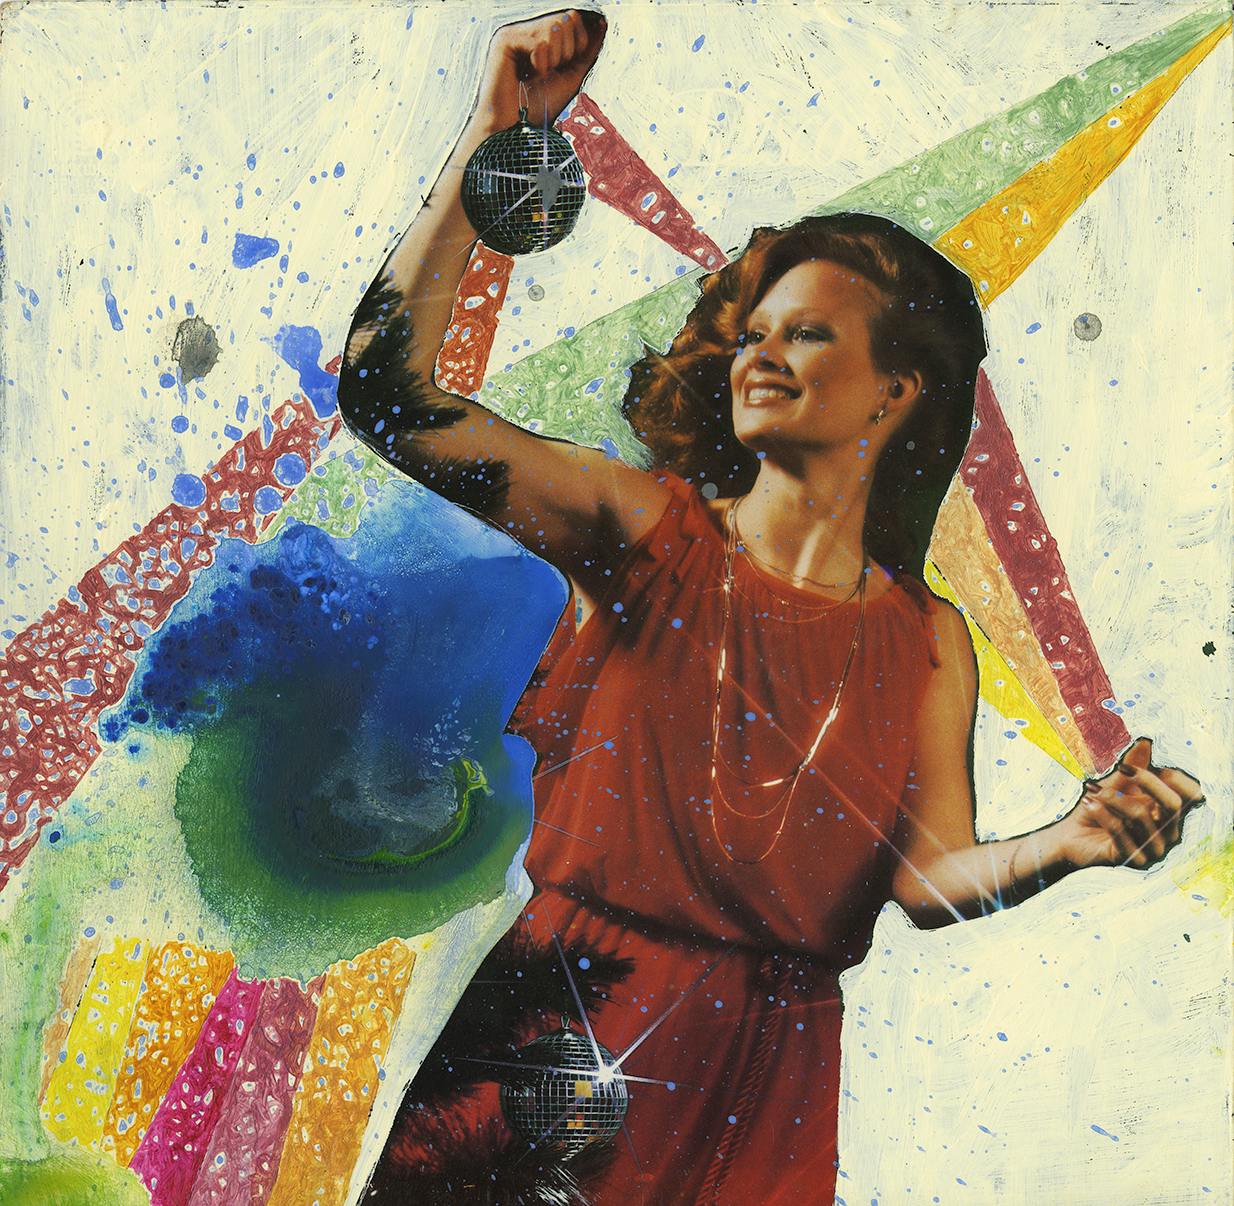 Image of one of Solei's colorful works. A woman in red holds up a small disco ball, and the background is splattered and diluted paint in the form of puddles, lines, and specks against a cream-over-blue layer.